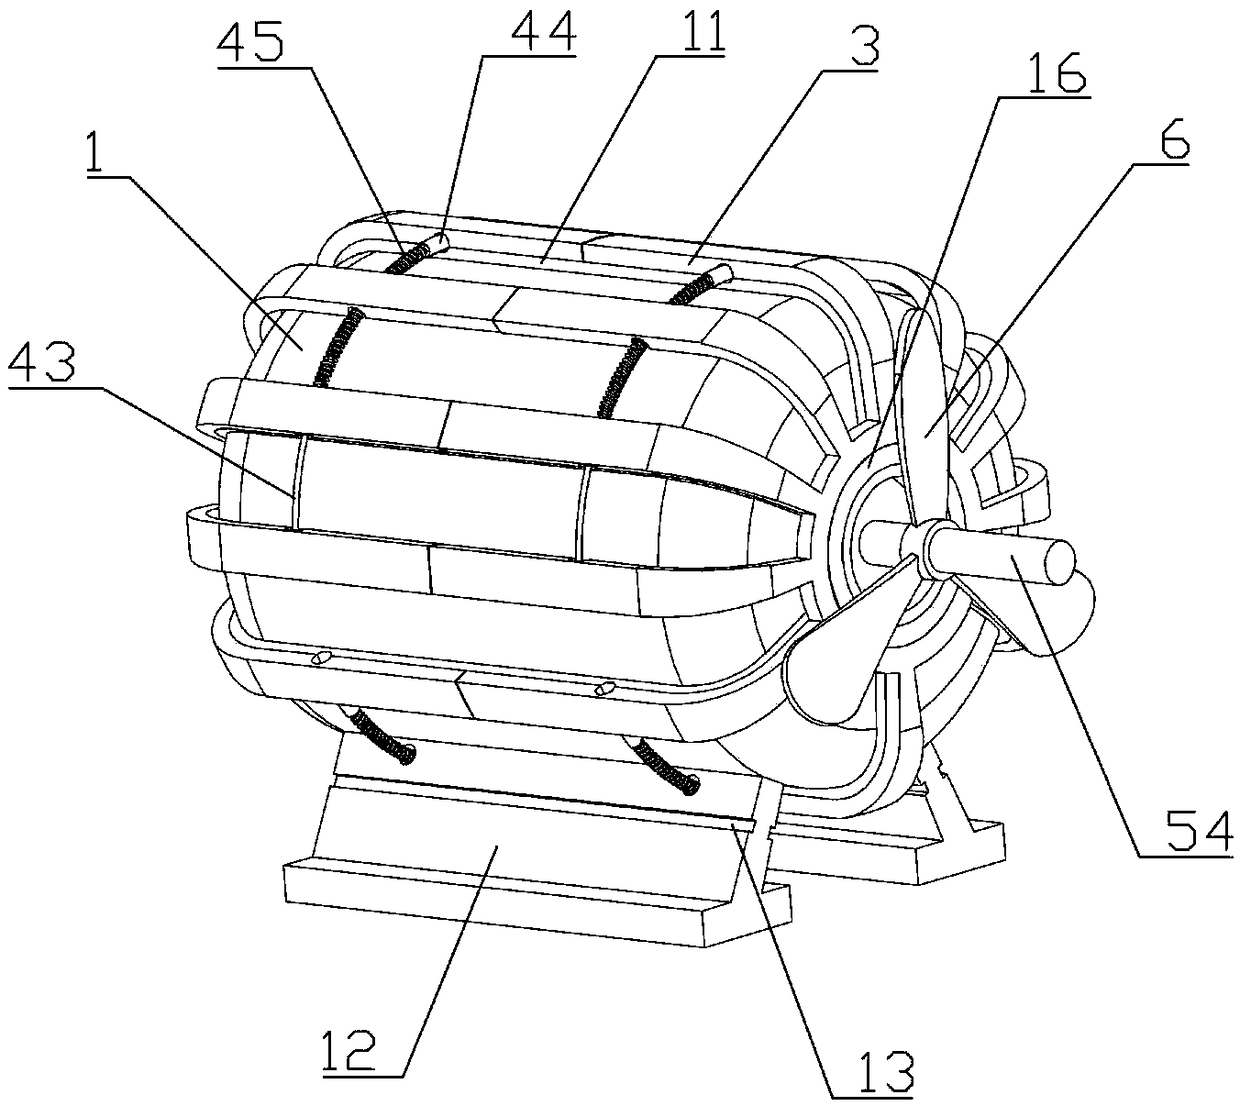 A contact heat dissipation motor